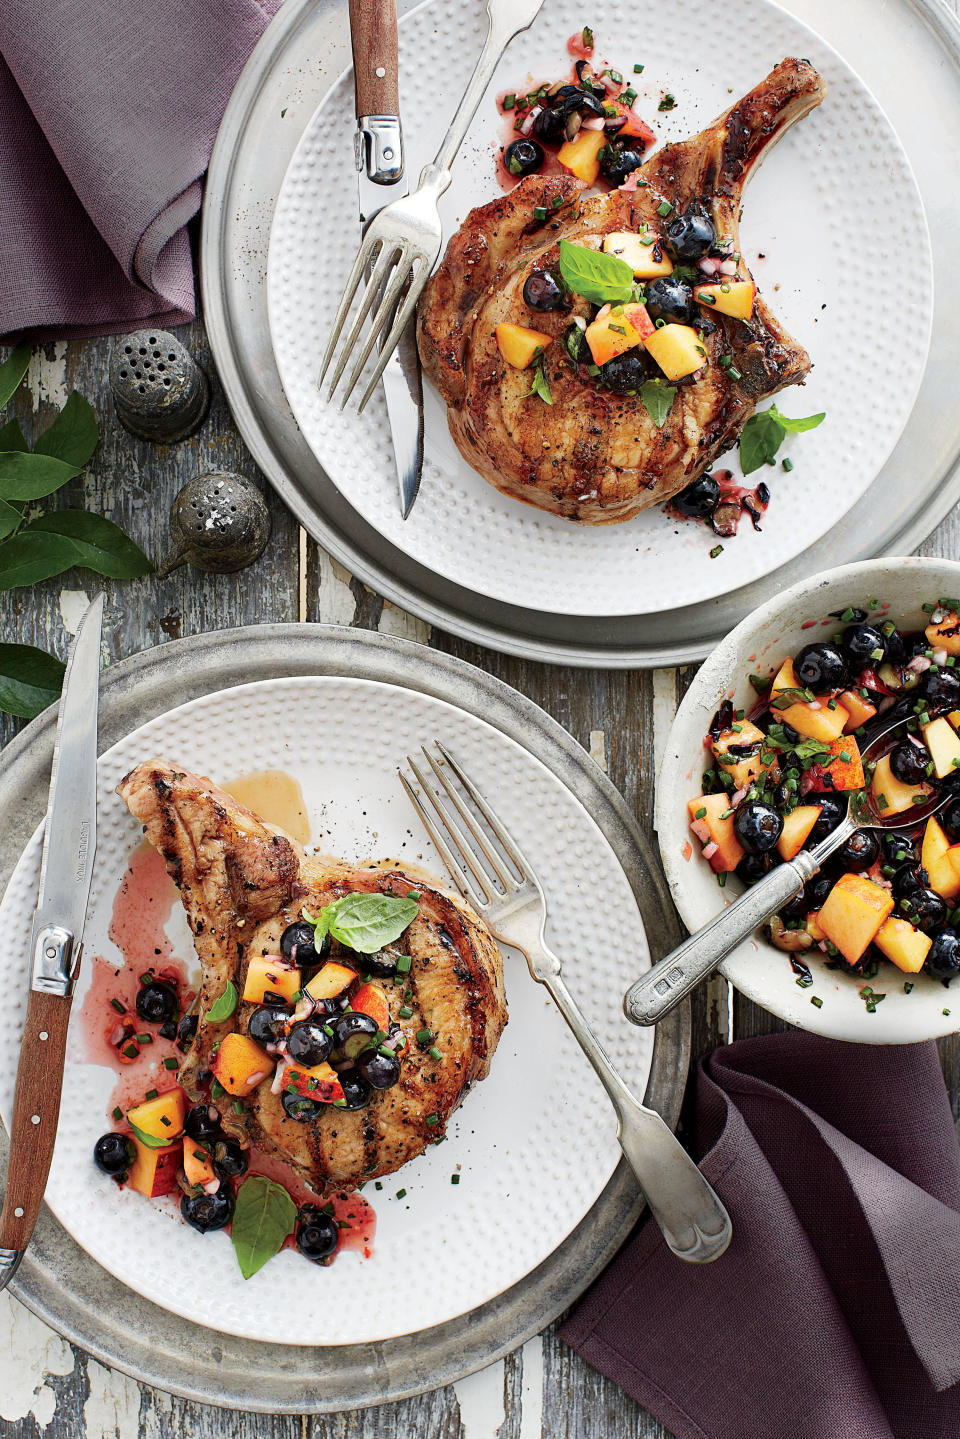 Grilled Pork Chops with Blueberry-Peach Salsa